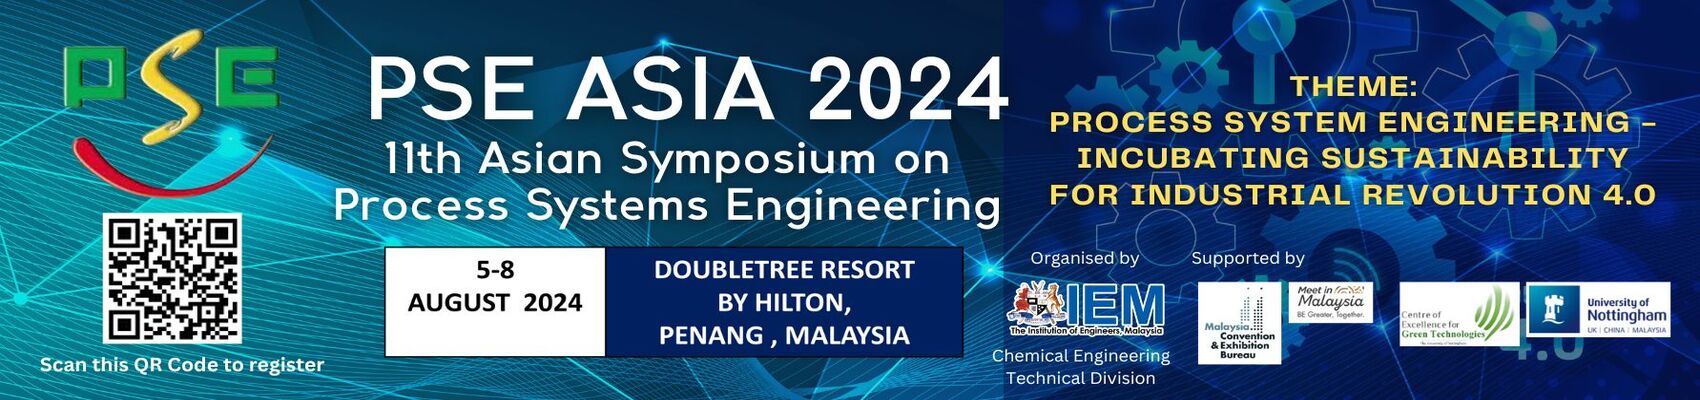 PSE ASIA 2024 - 11th Asian Symposium on Process Systems Engineering